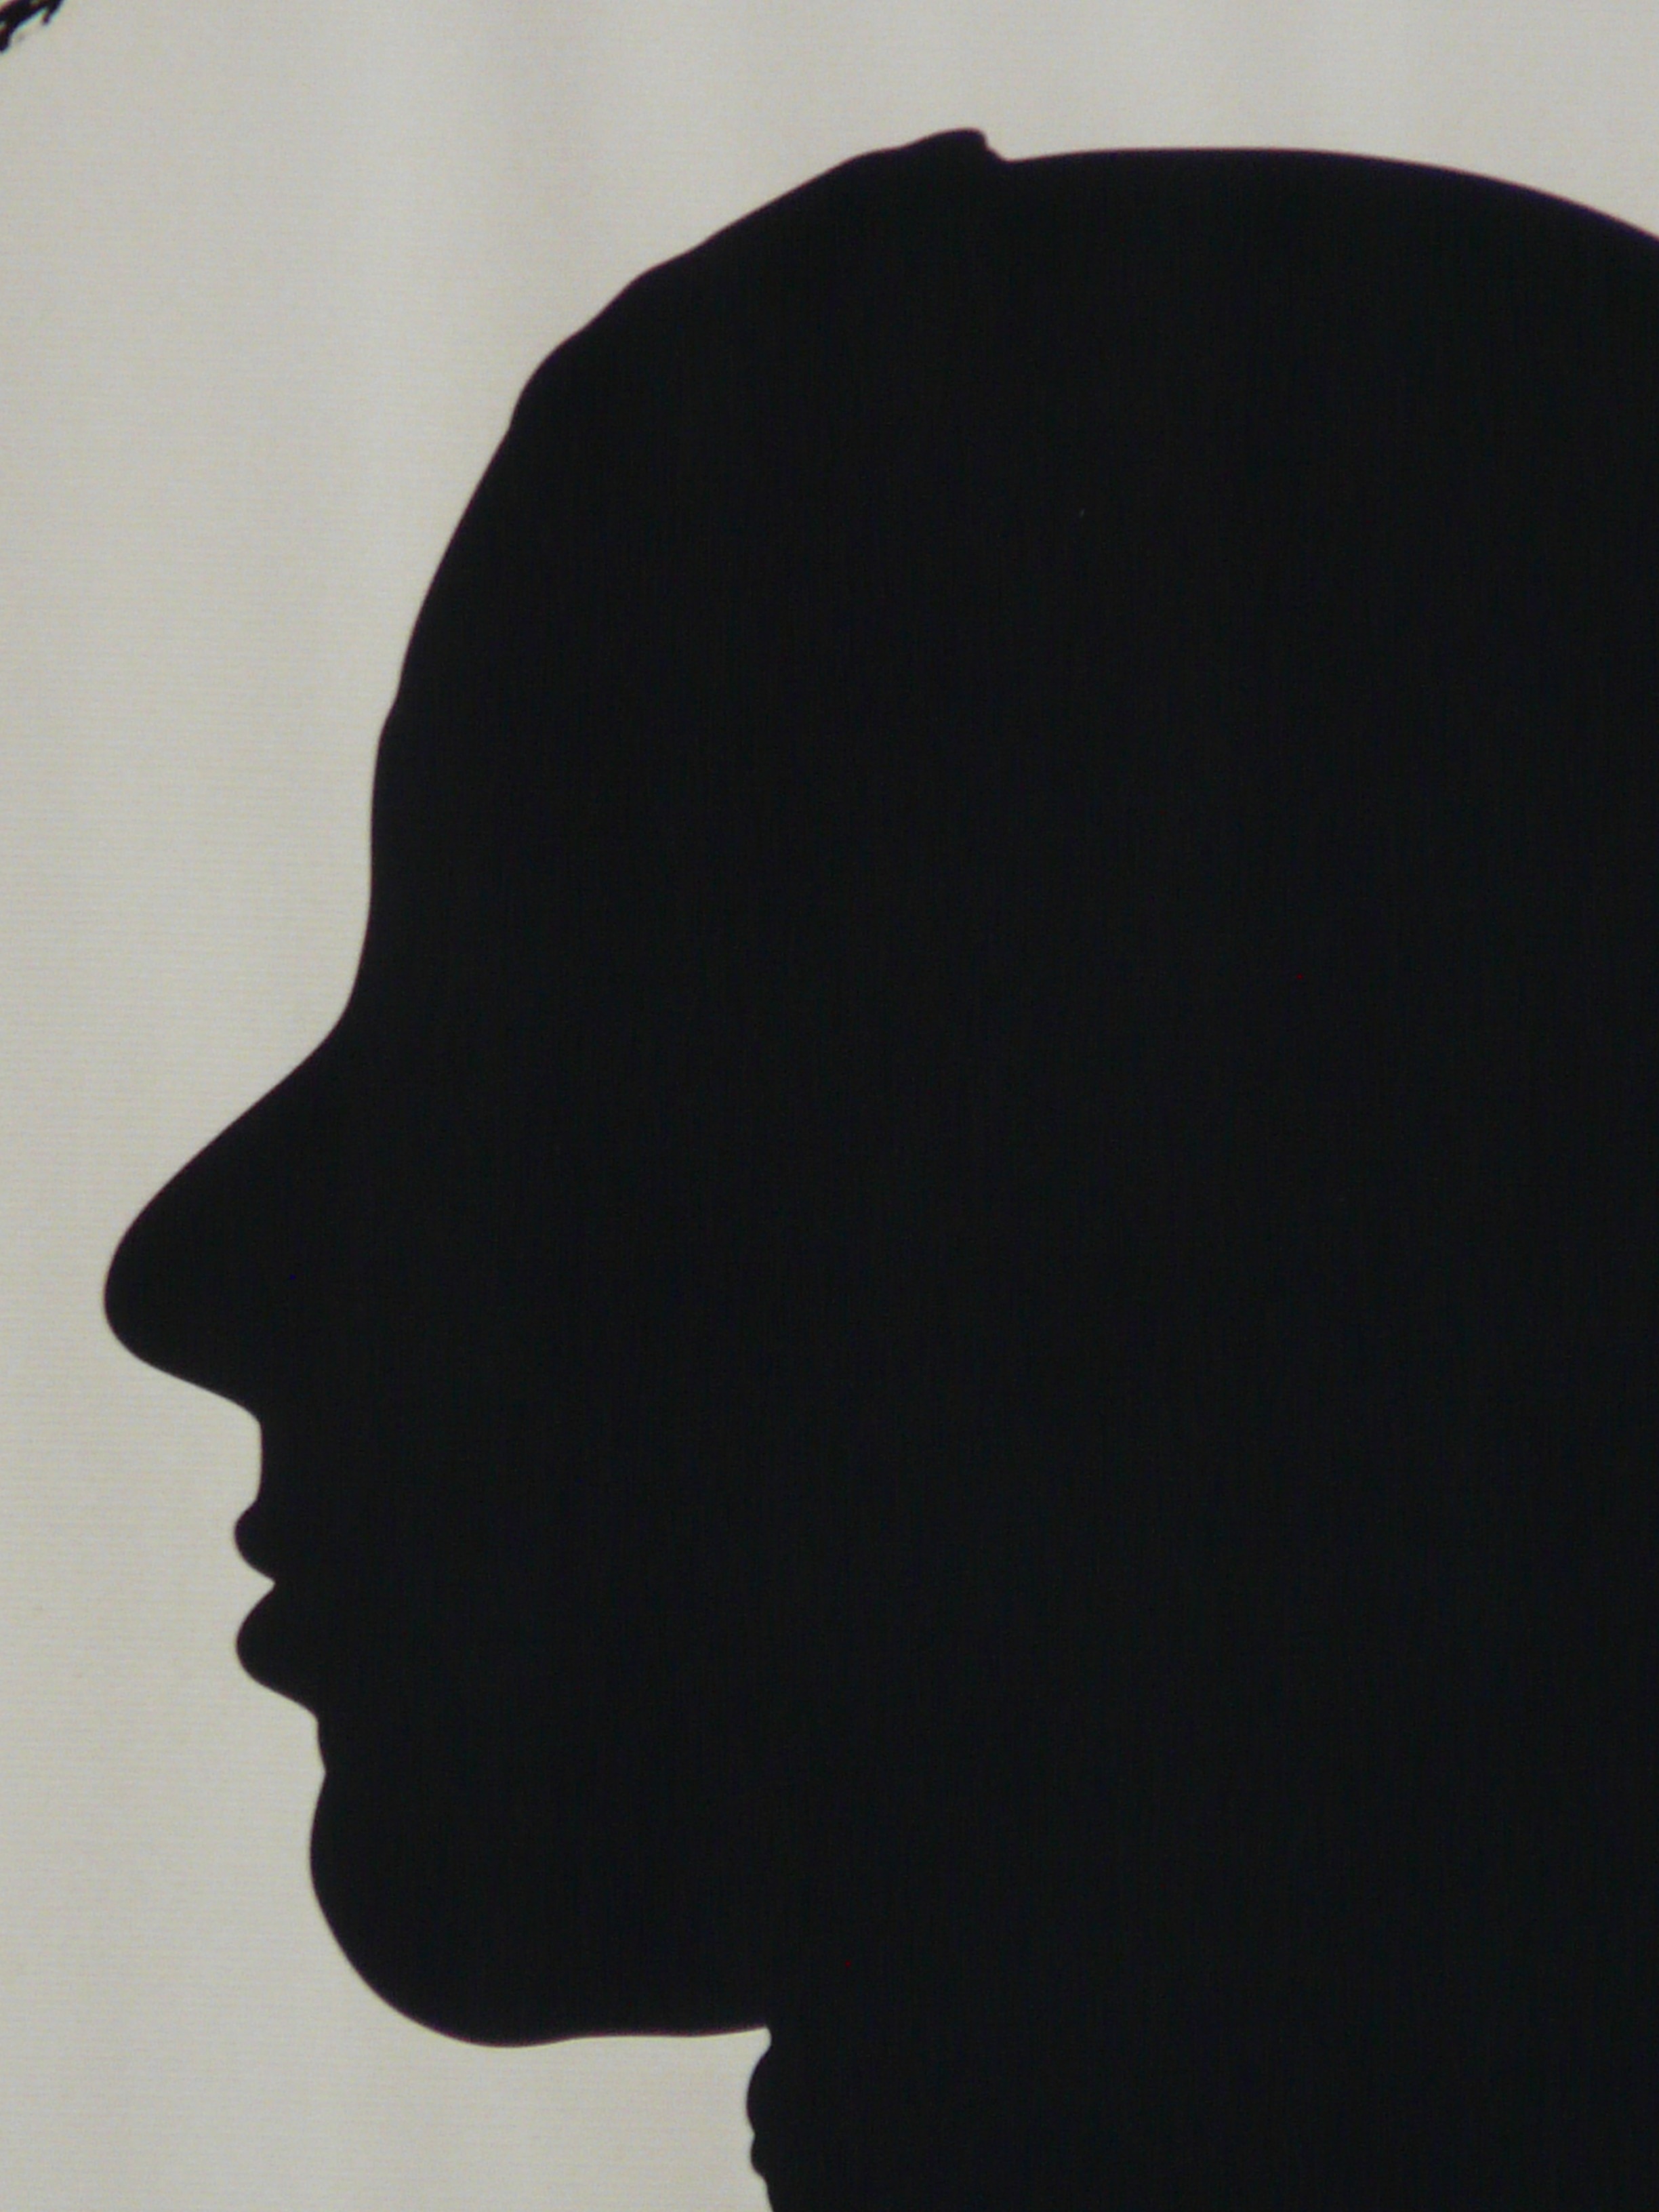 silhouette of person's face